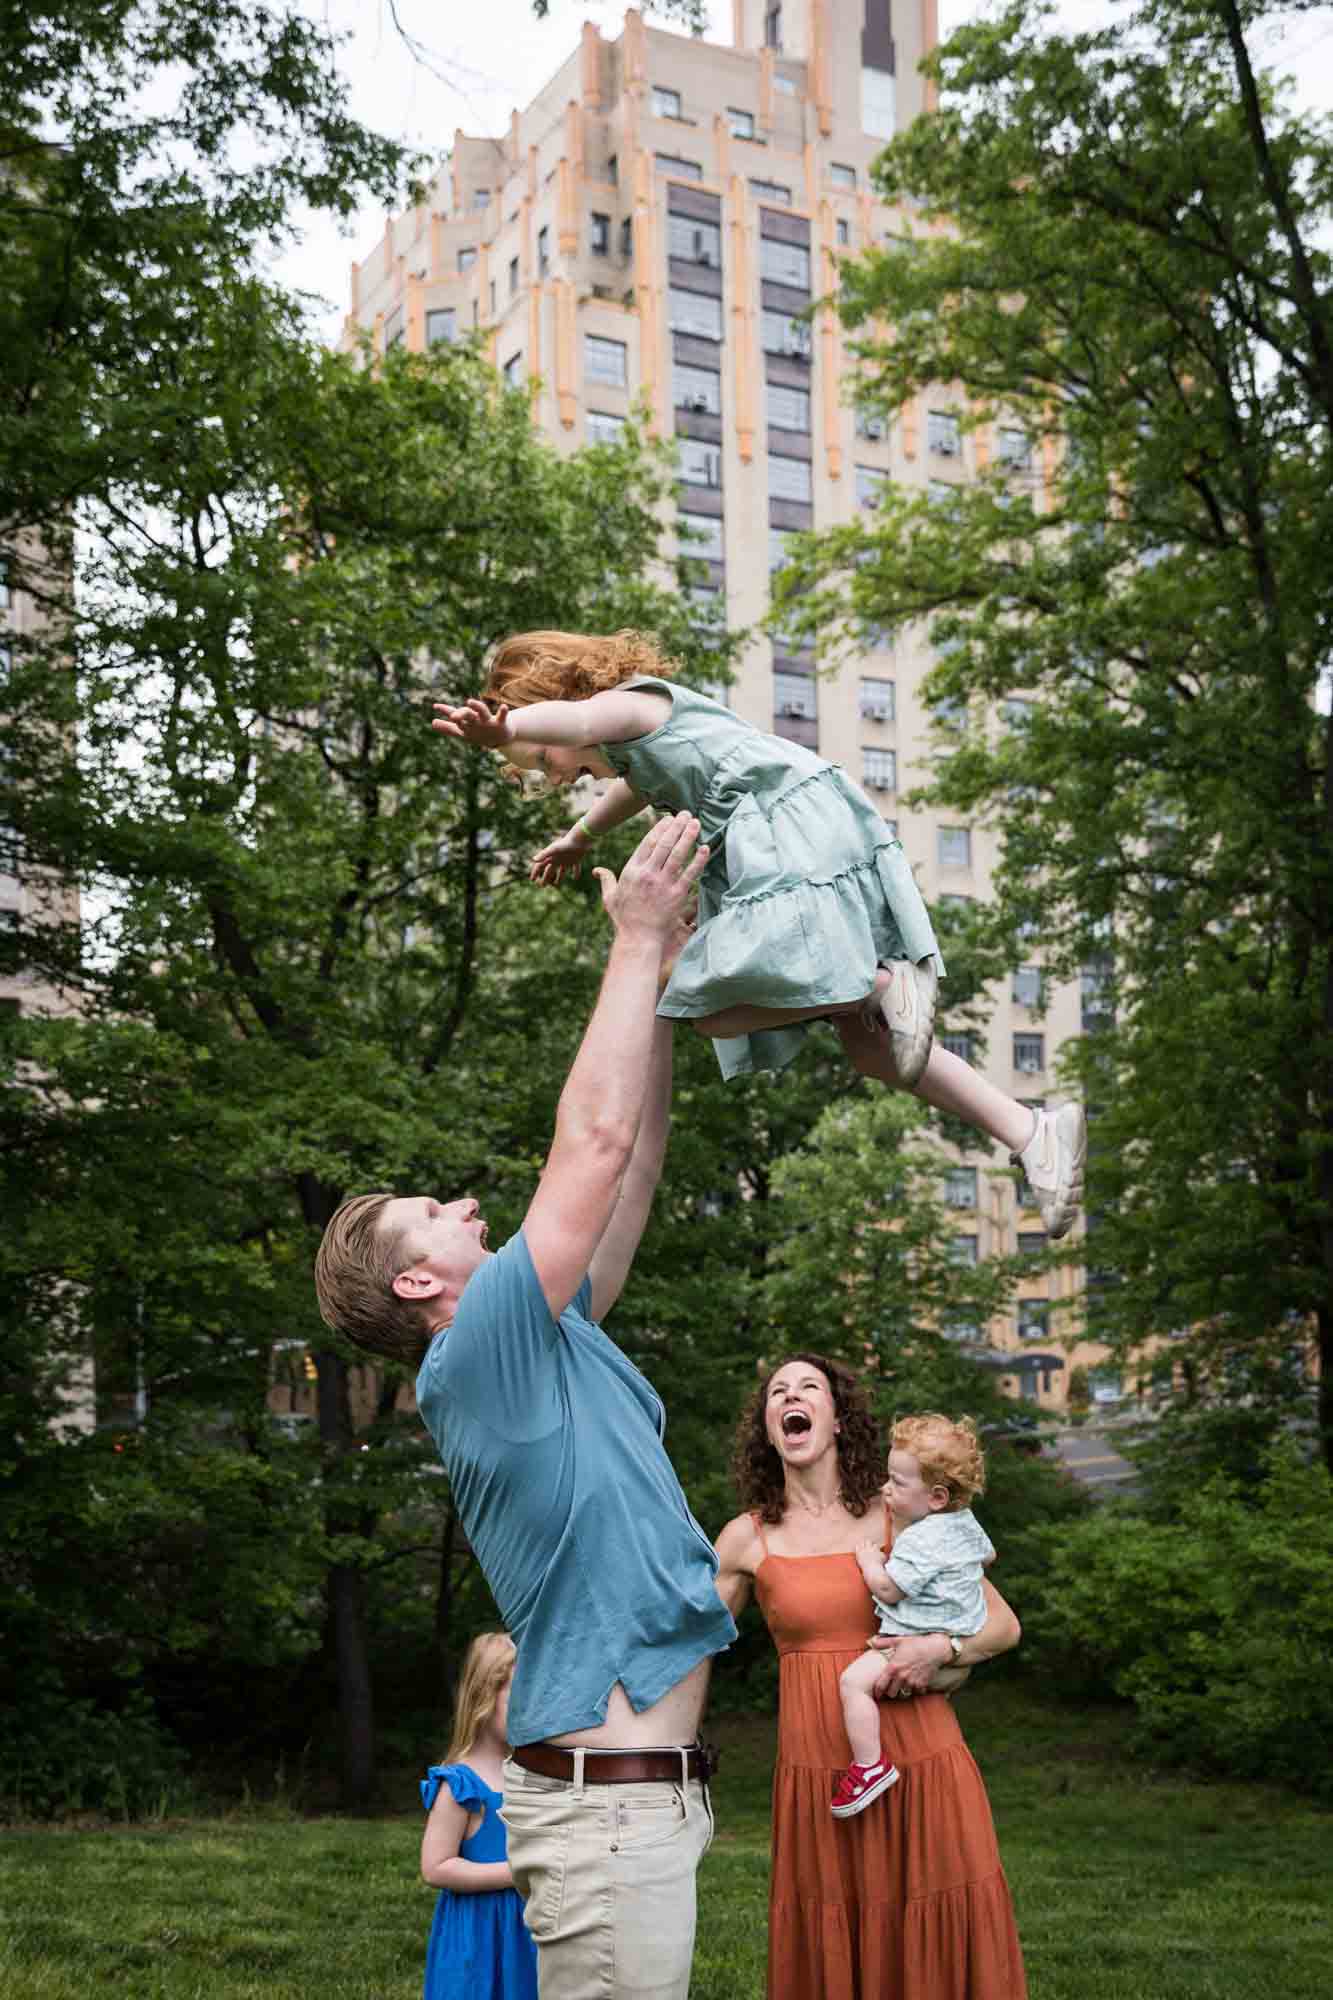 Father throwing little girl in the air with mother reacting in front of building during a Central Park family portrait session